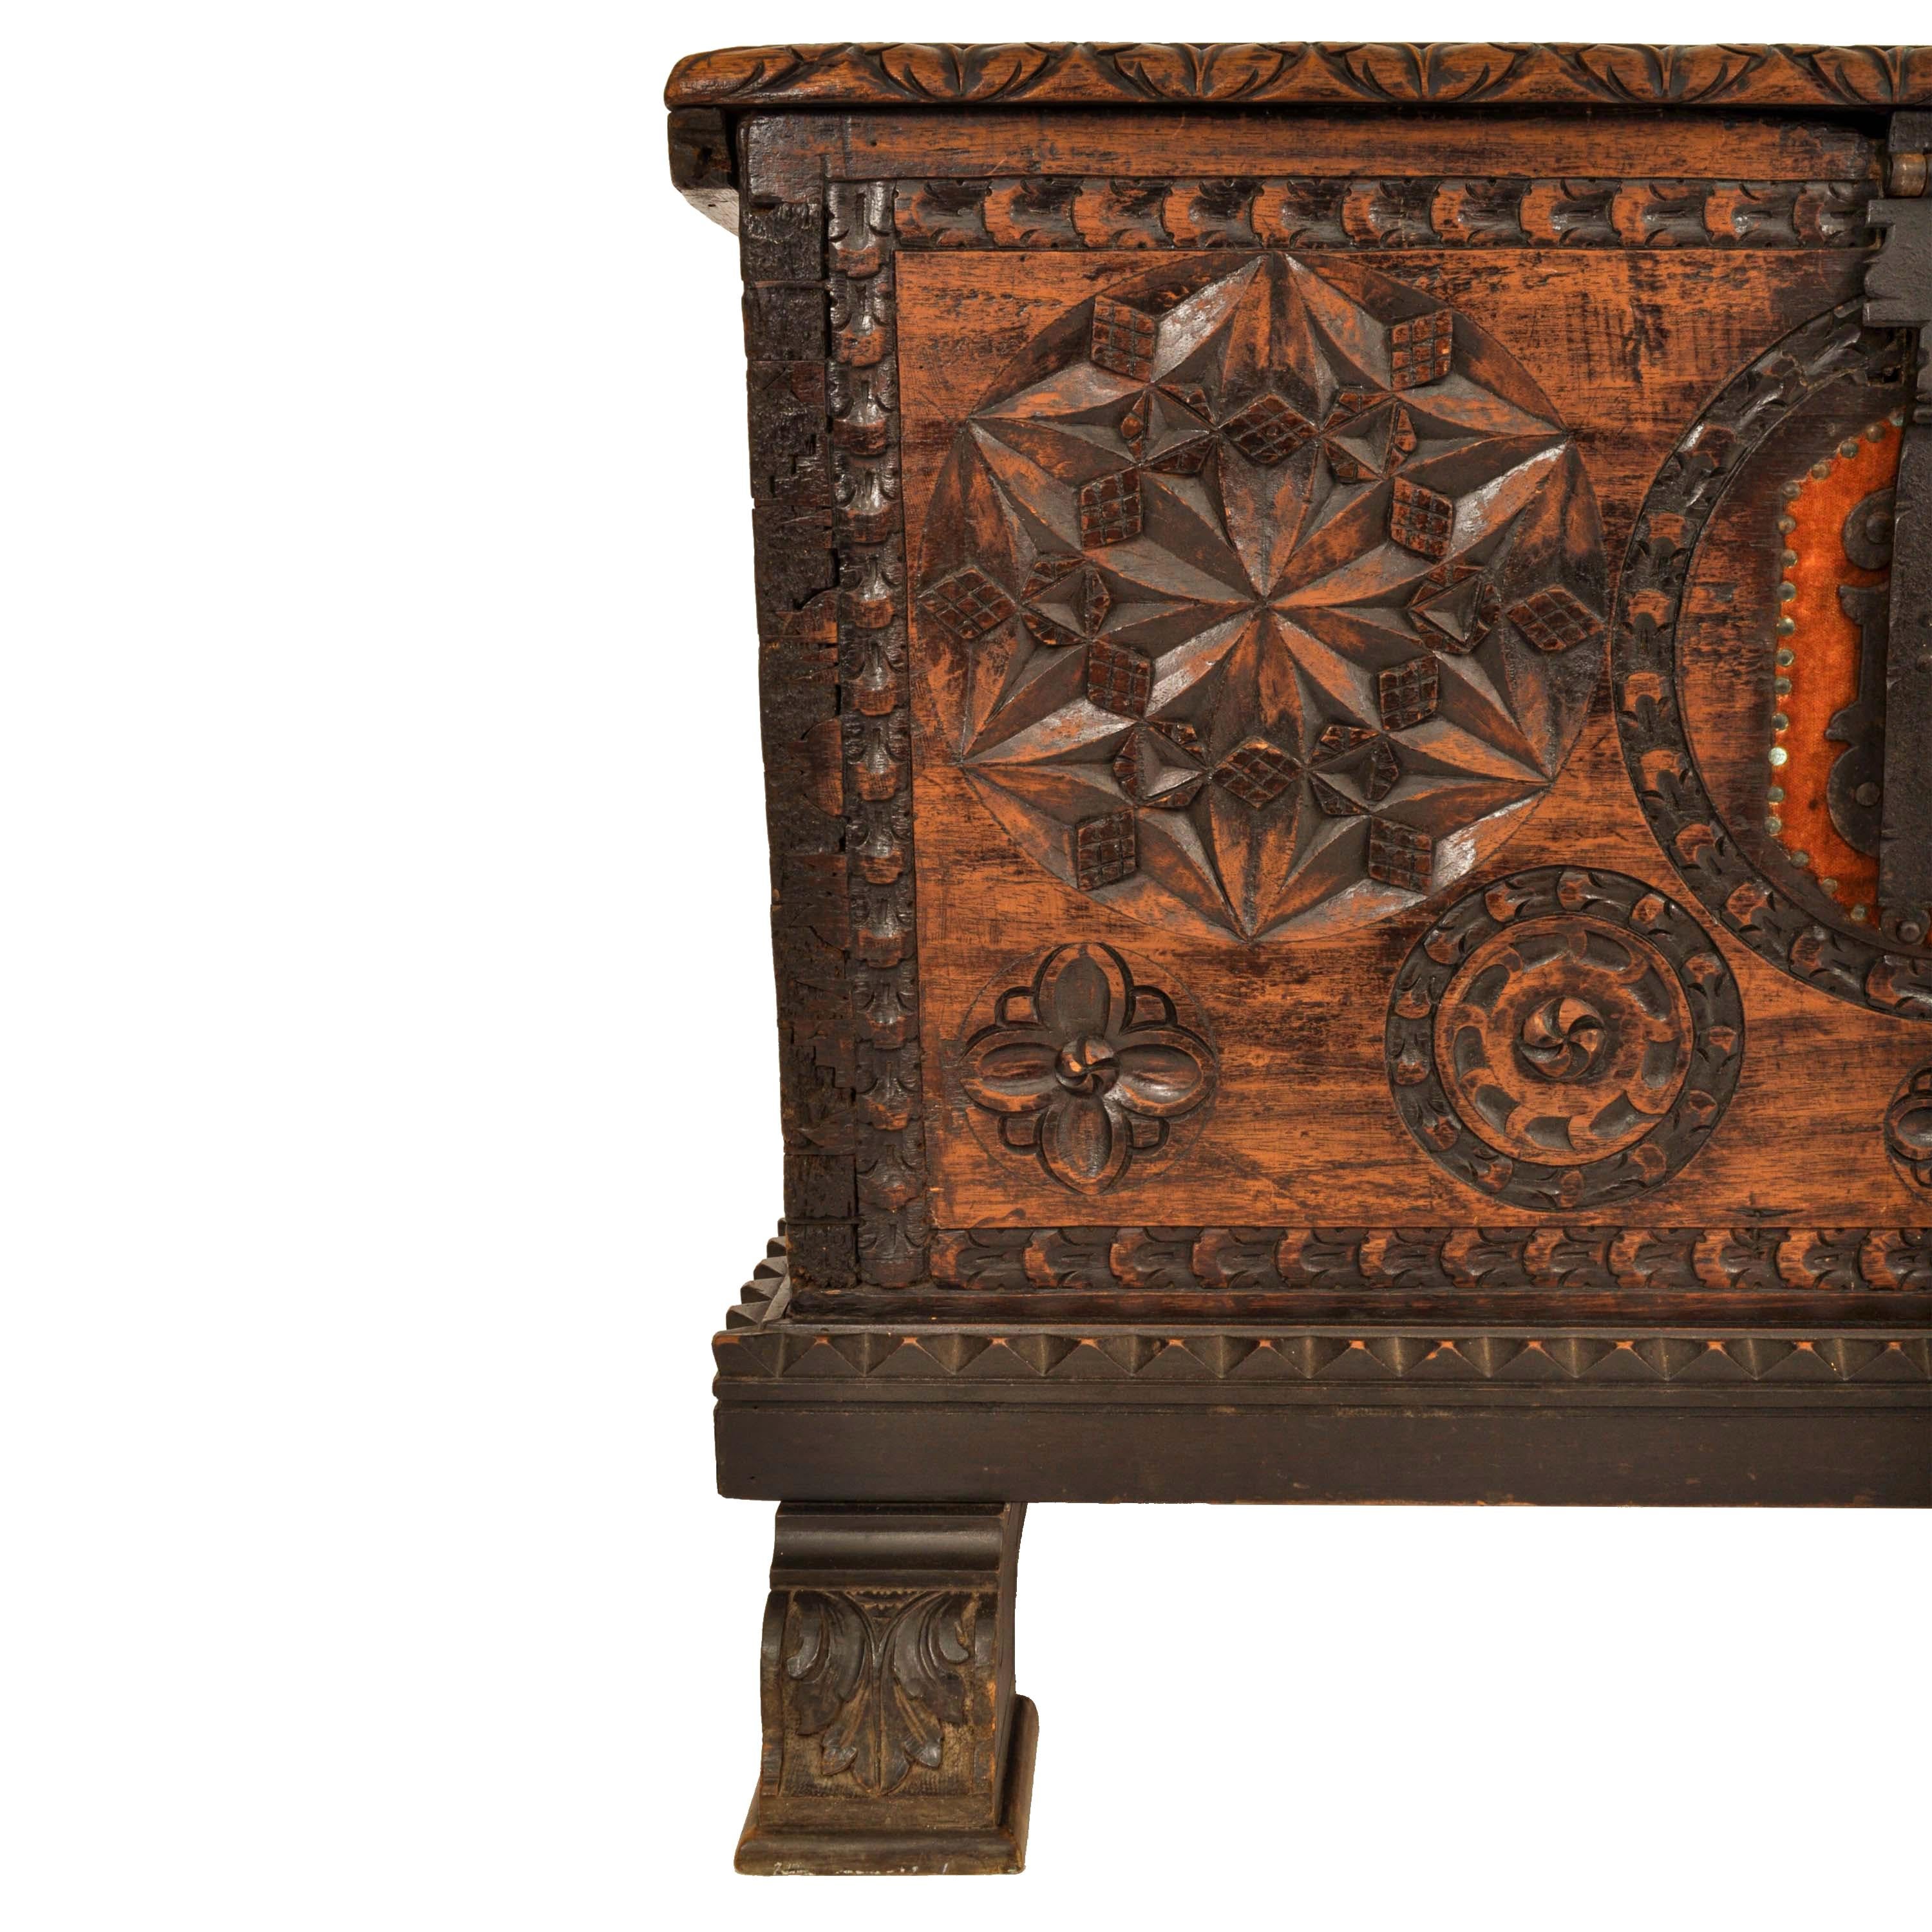 Antique Scandinavian Pine Baroque Folk Art Carved Dowry Chest Trunk Coffer 1780 For Sale 10